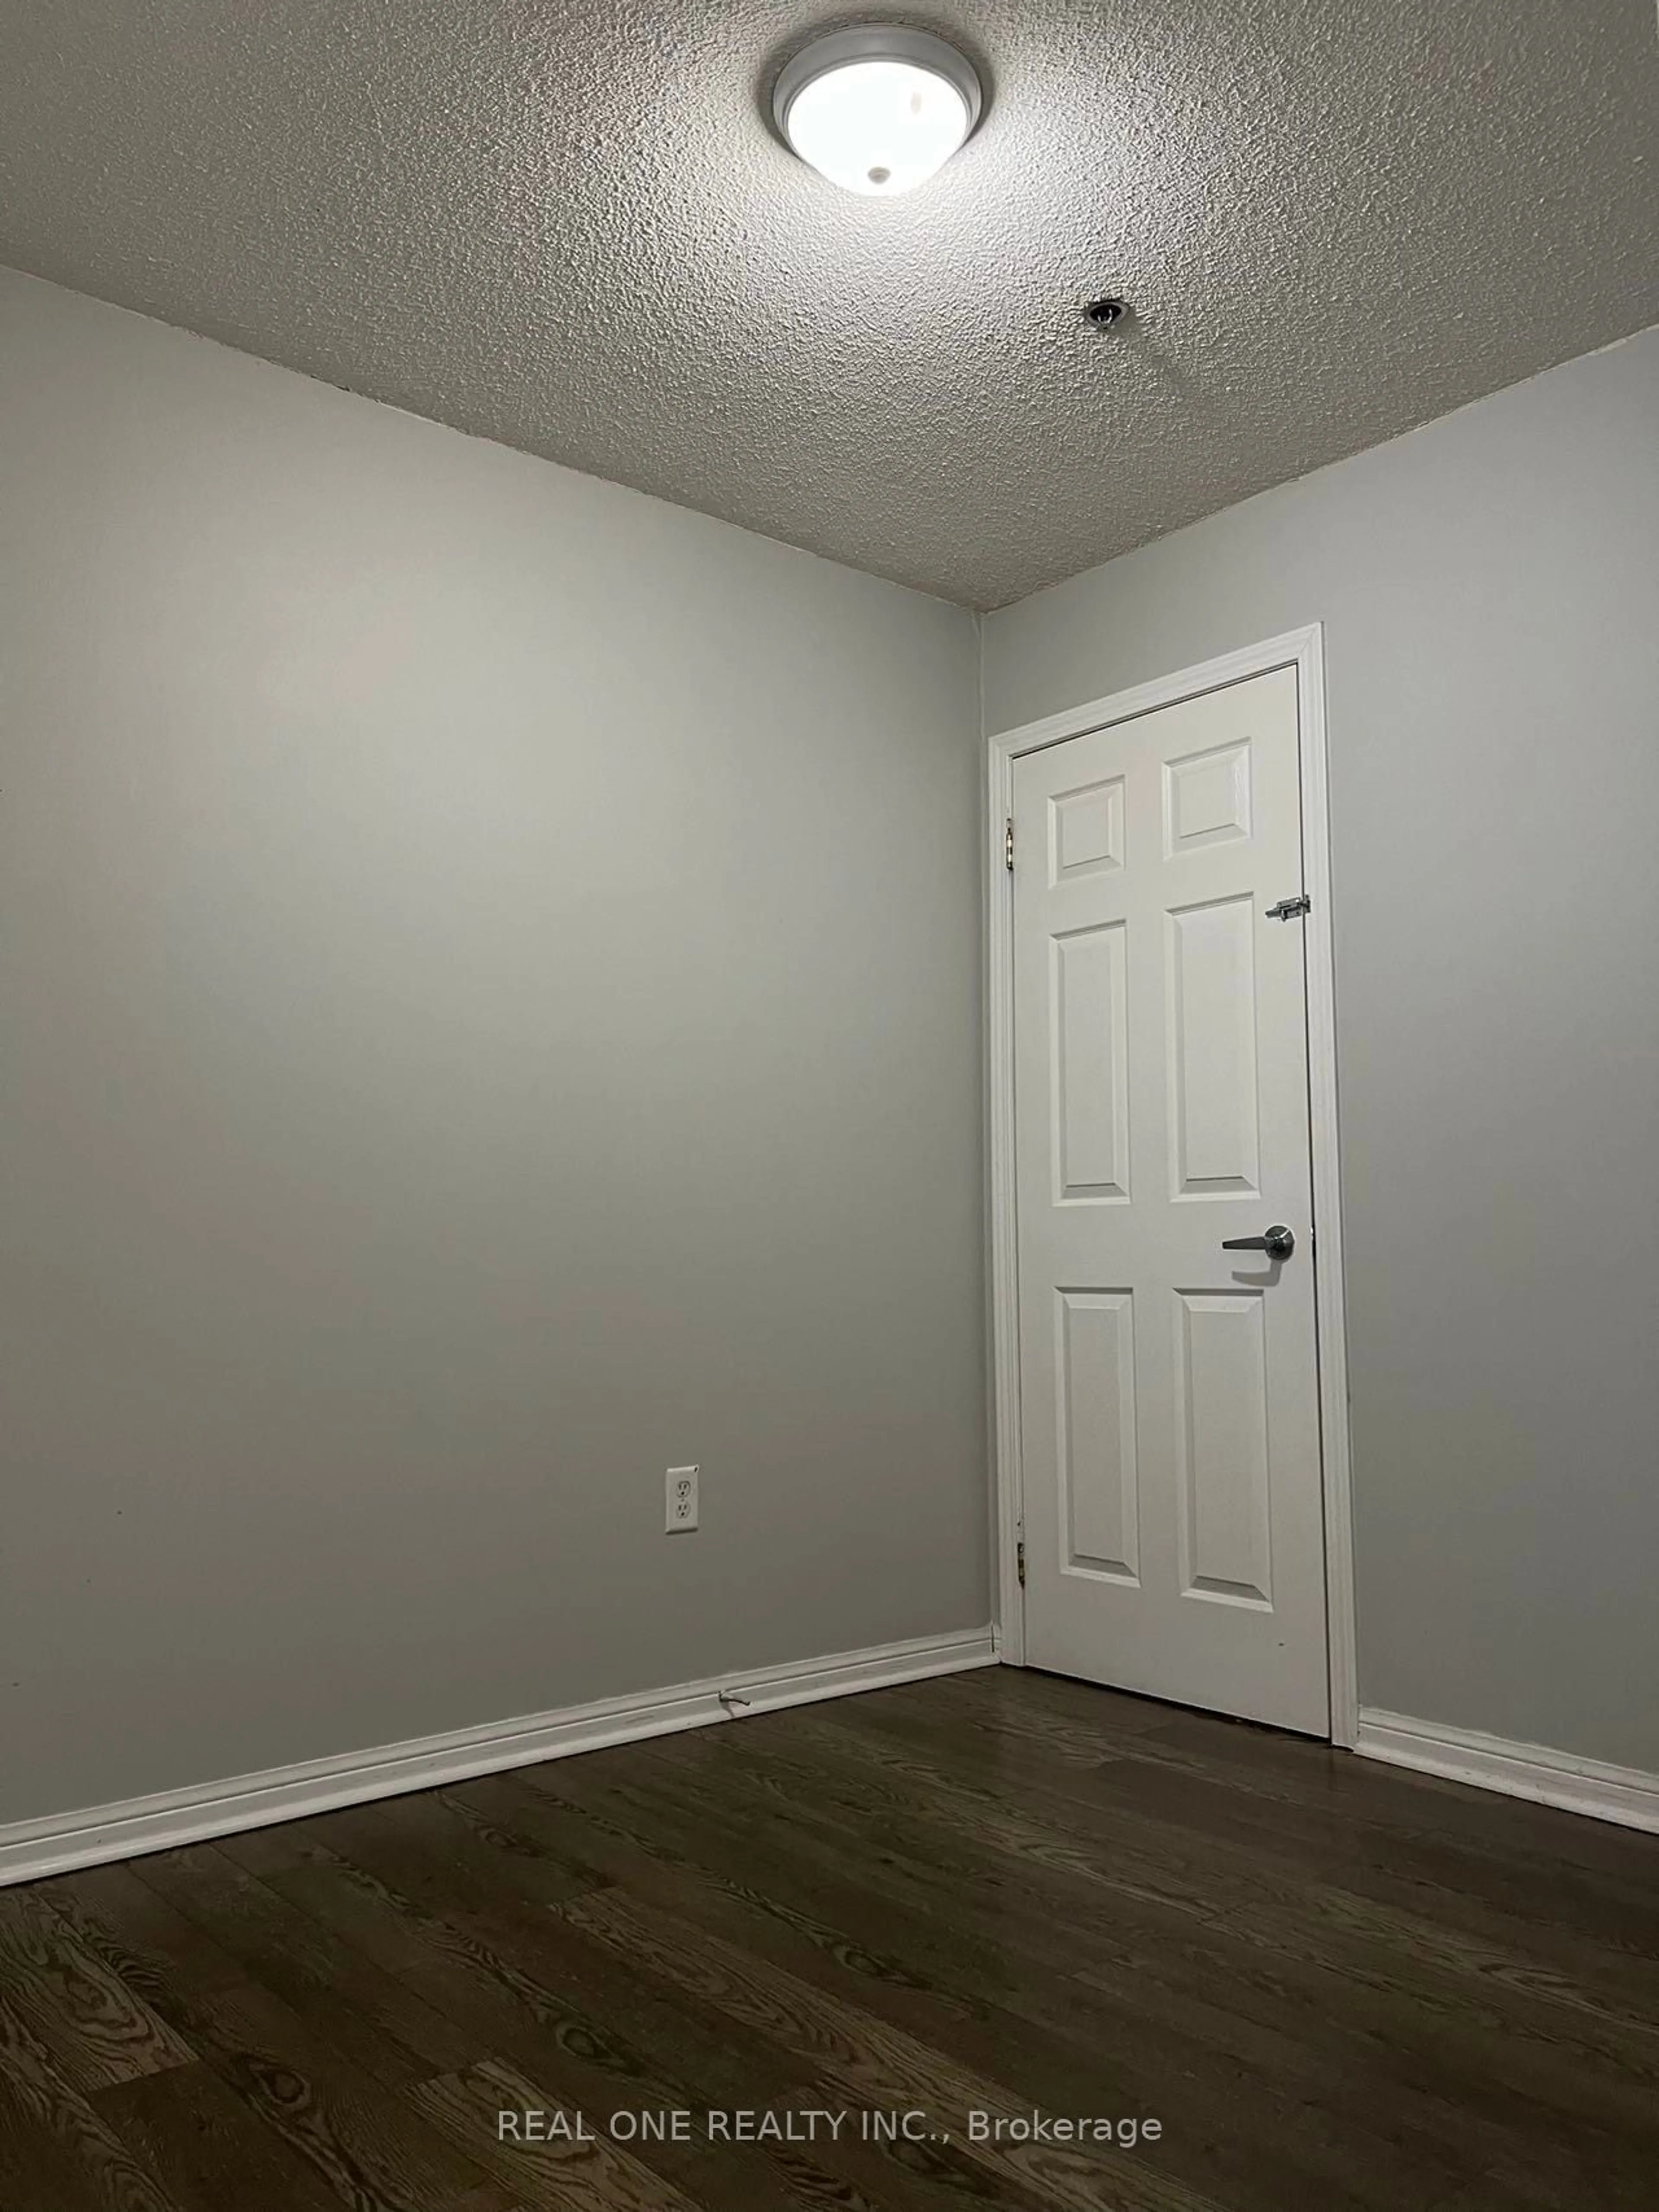 A pic of a room for 5235 Finch Ave #306, Toronto Ontario M1S 5W8